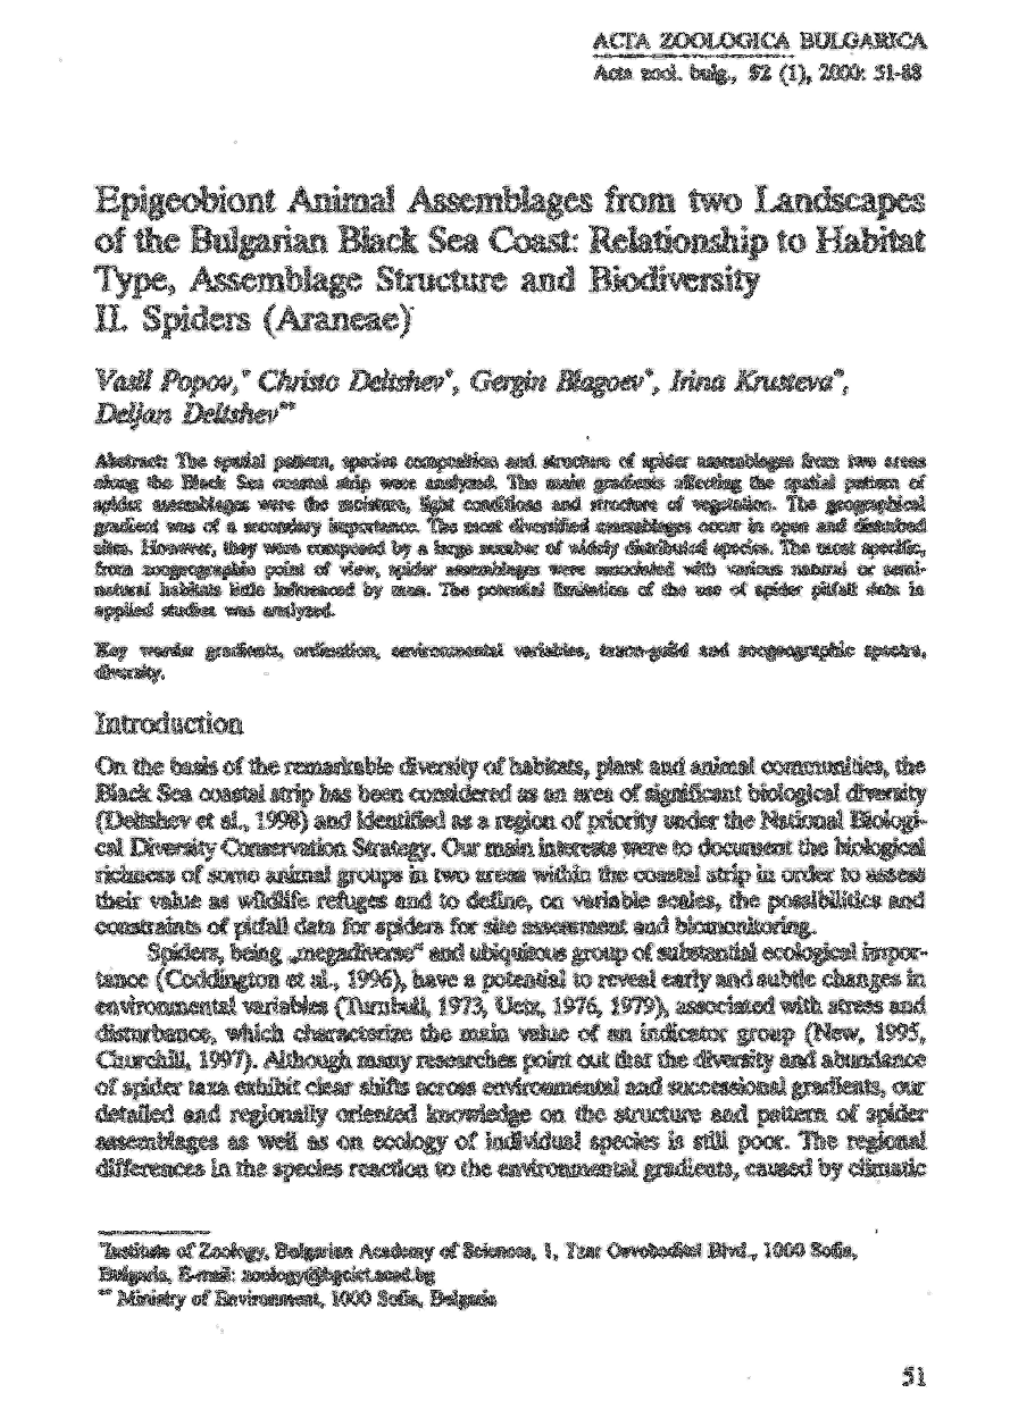 Epigeobiont Animal Assemblages from Two Landscapes of the Bulgarian Black Sea Coast: Relationship to Habitat Type, Assemblage Structure and Biodiversity N